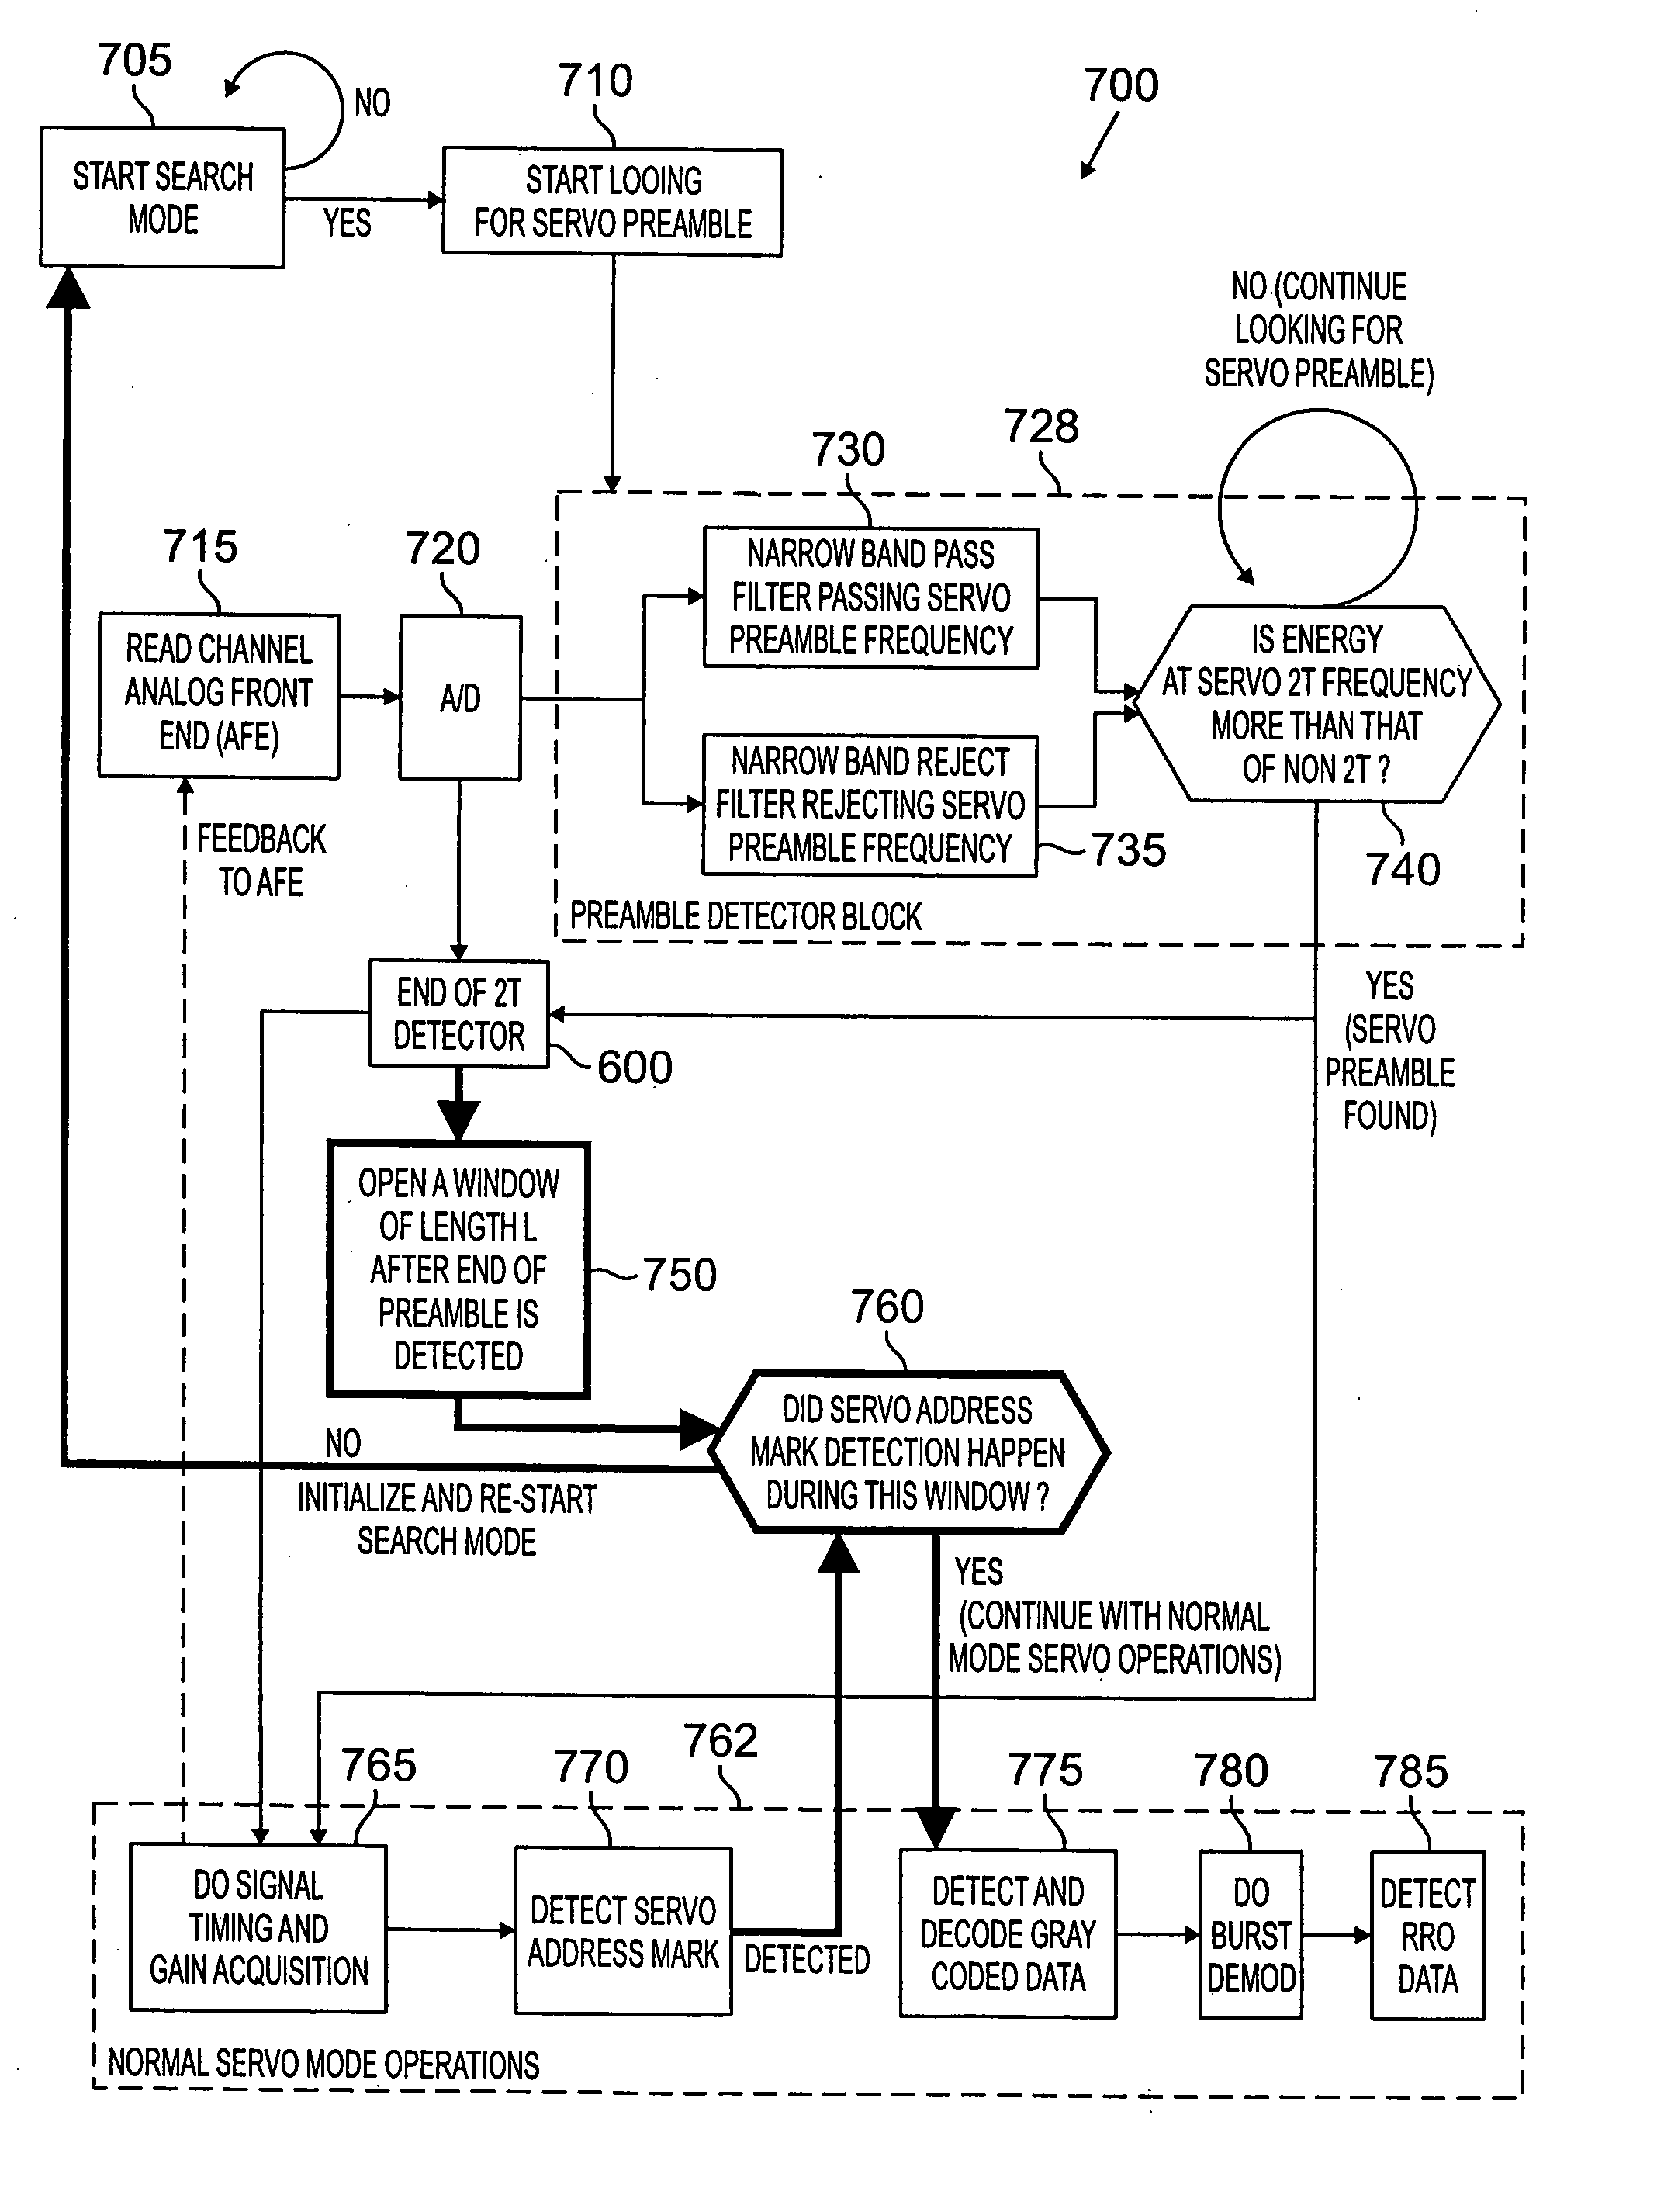 Method and apparatus for improved address mark detection